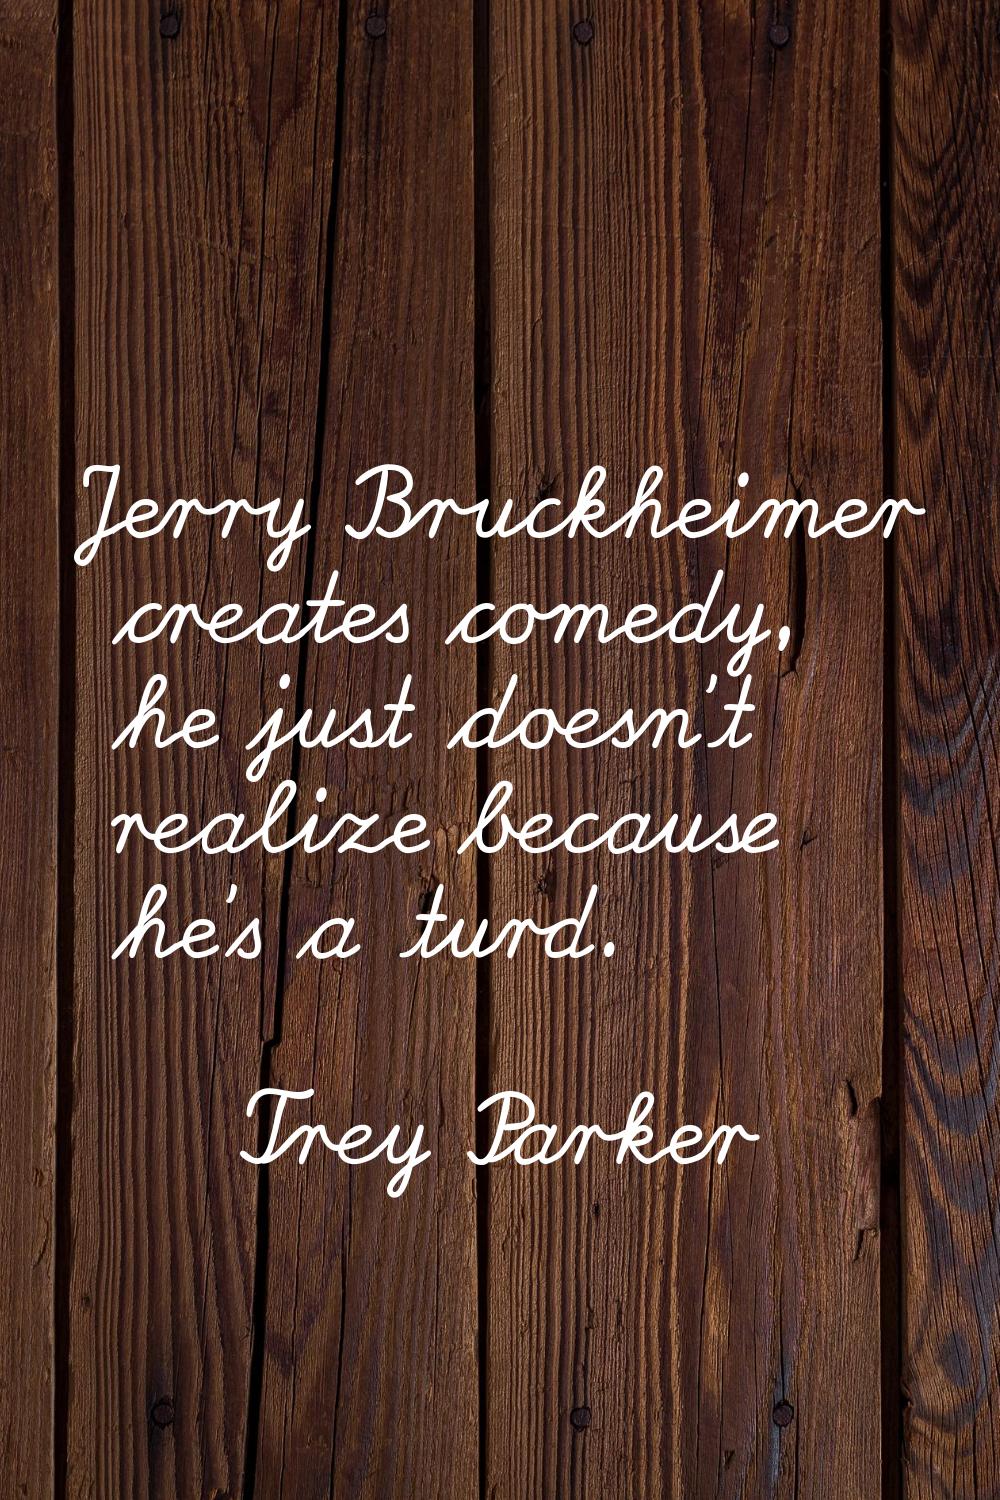 Jerry Bruckheimer creates comedy, he just doesn't realize because he's a turd.